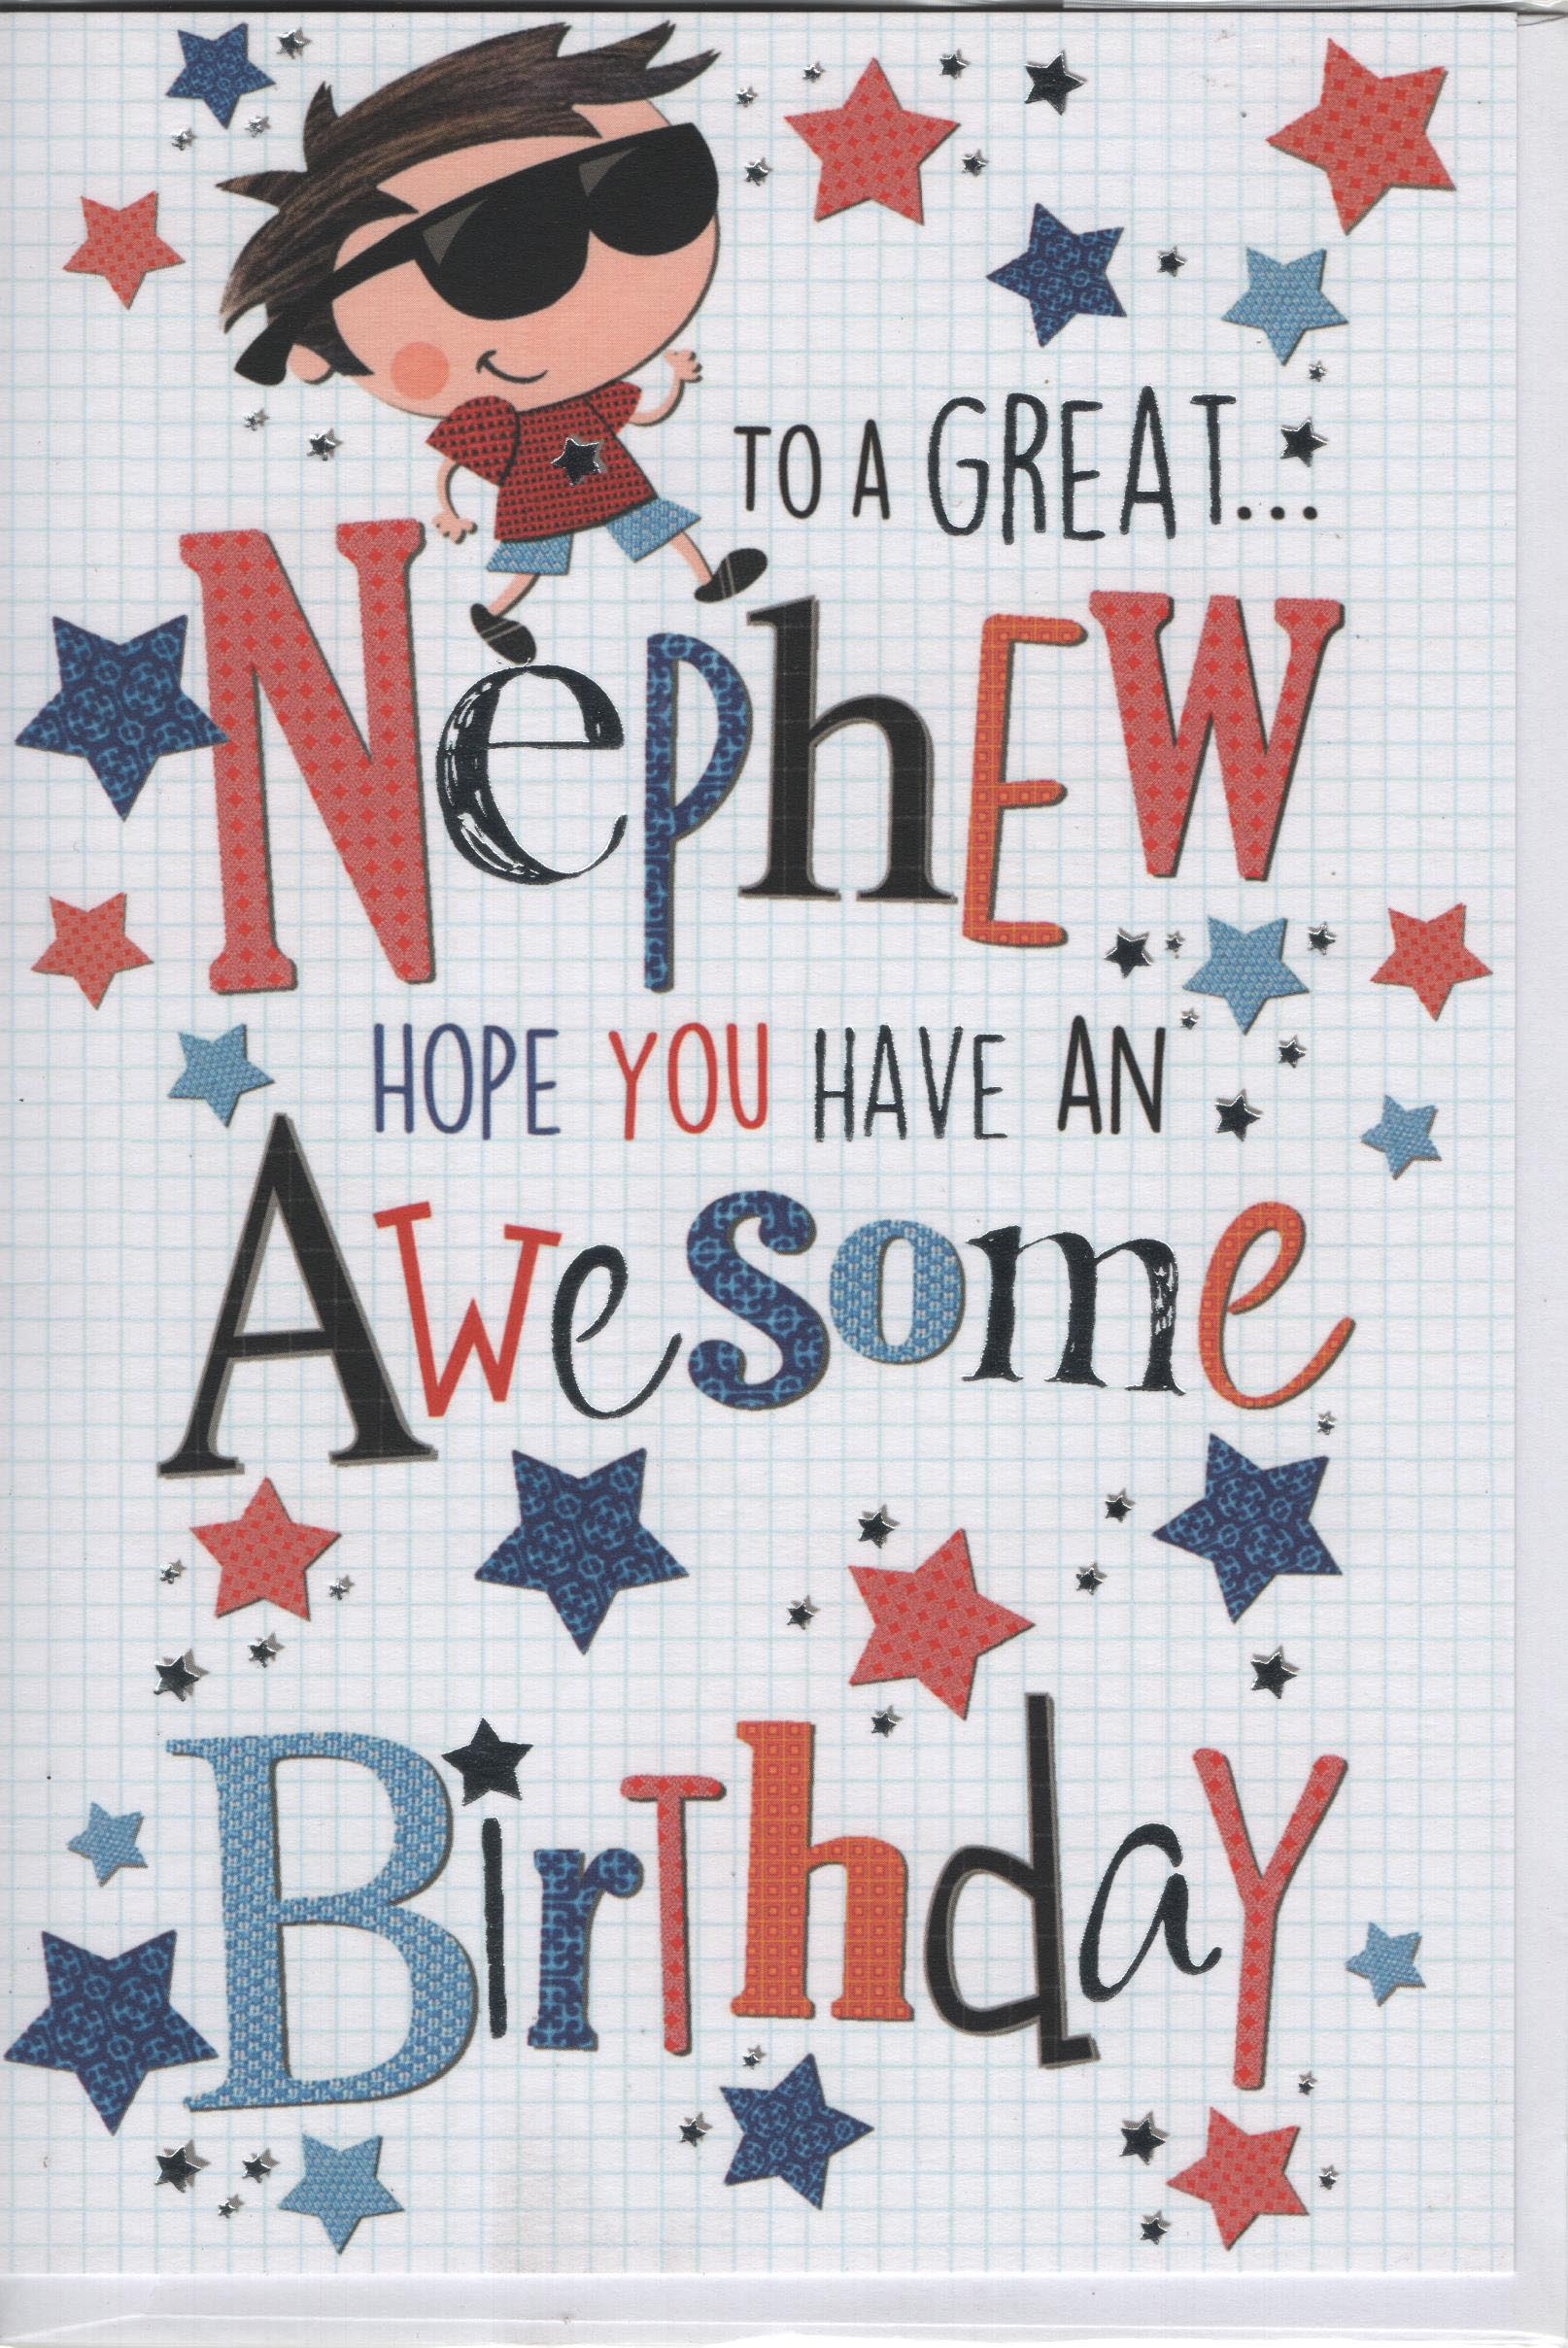 To a Great Nephew Hope You Have an Awesome Birthday